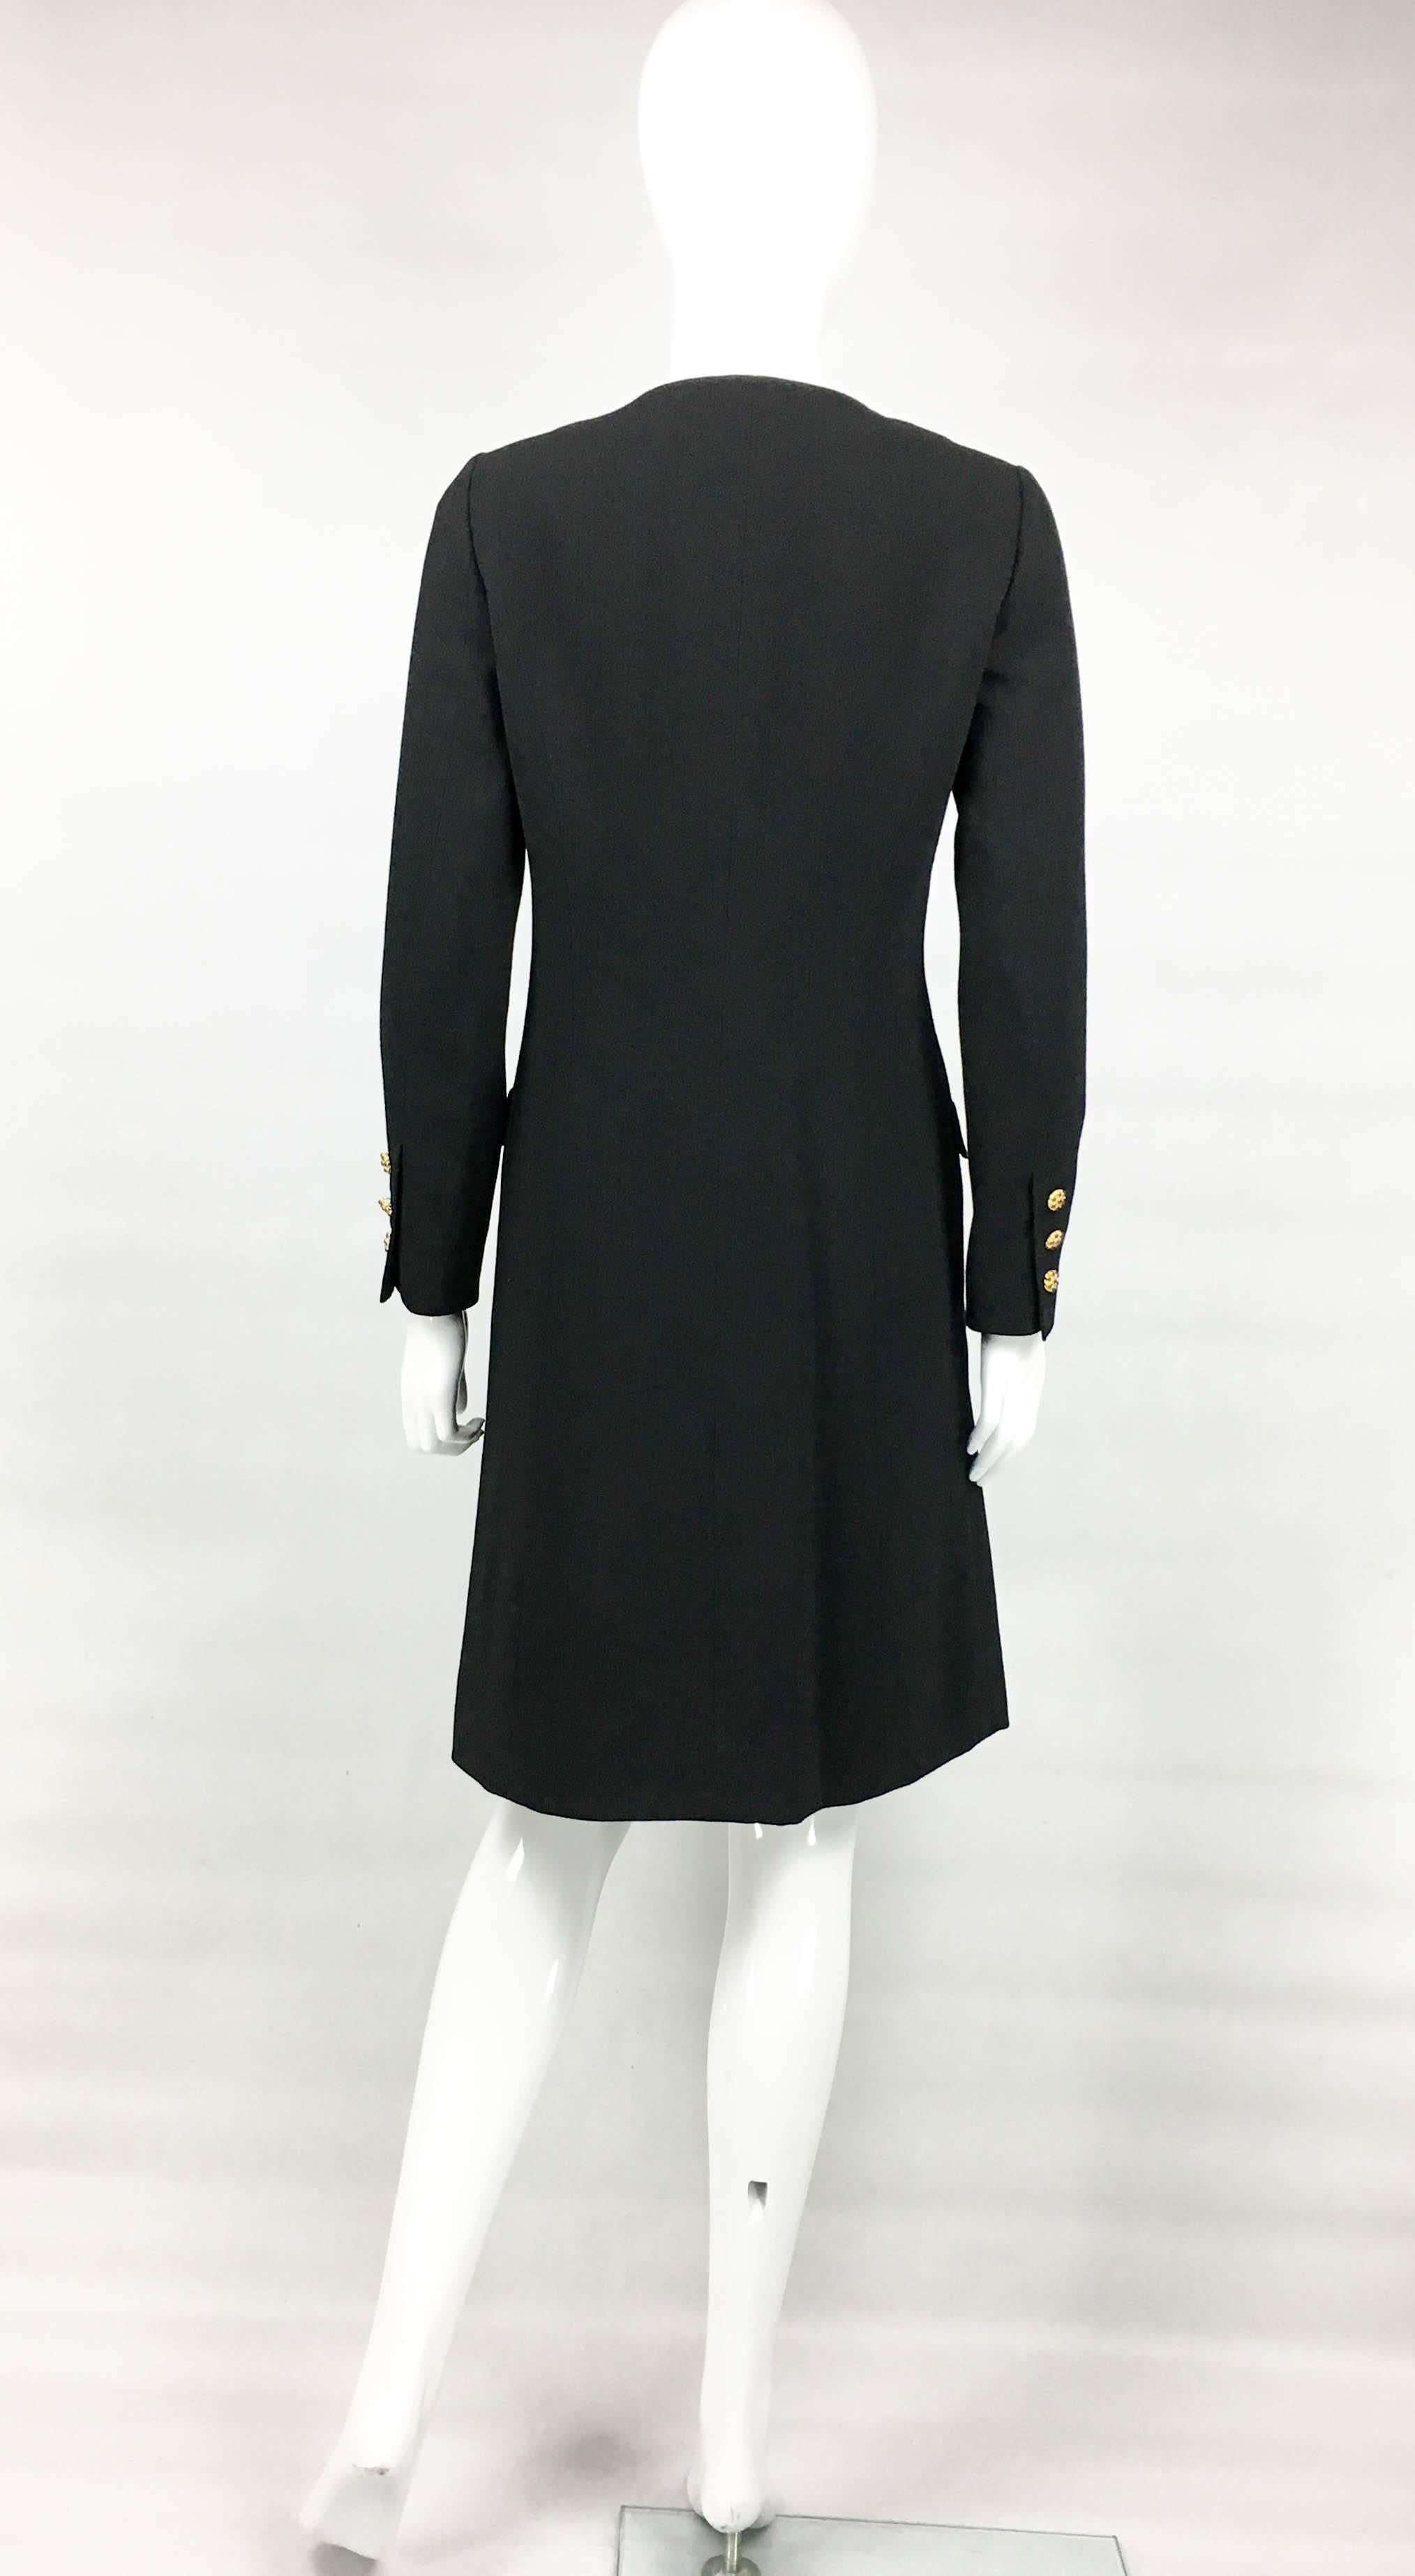 1996 Chanel Runway Look Black Wool Coat / Dress With Baroque-Style Buttons 3